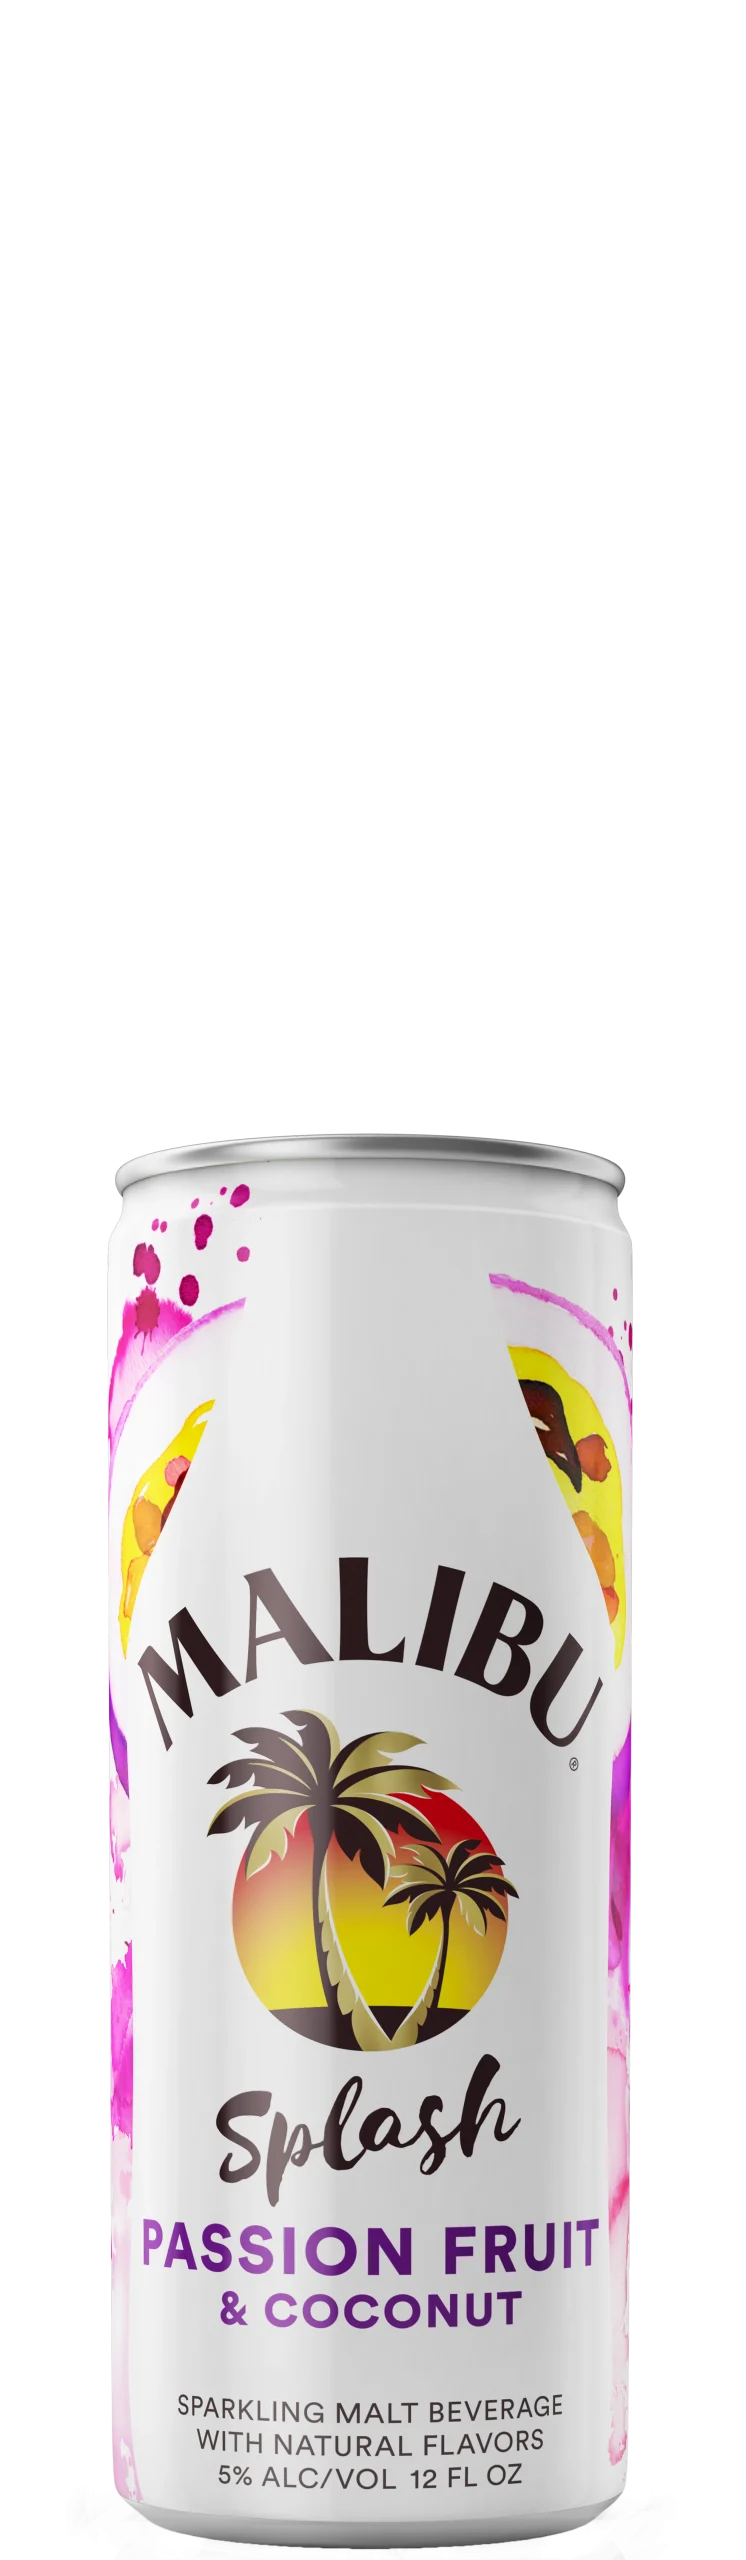 Malibu RTD splash can with passion fruit and coconut